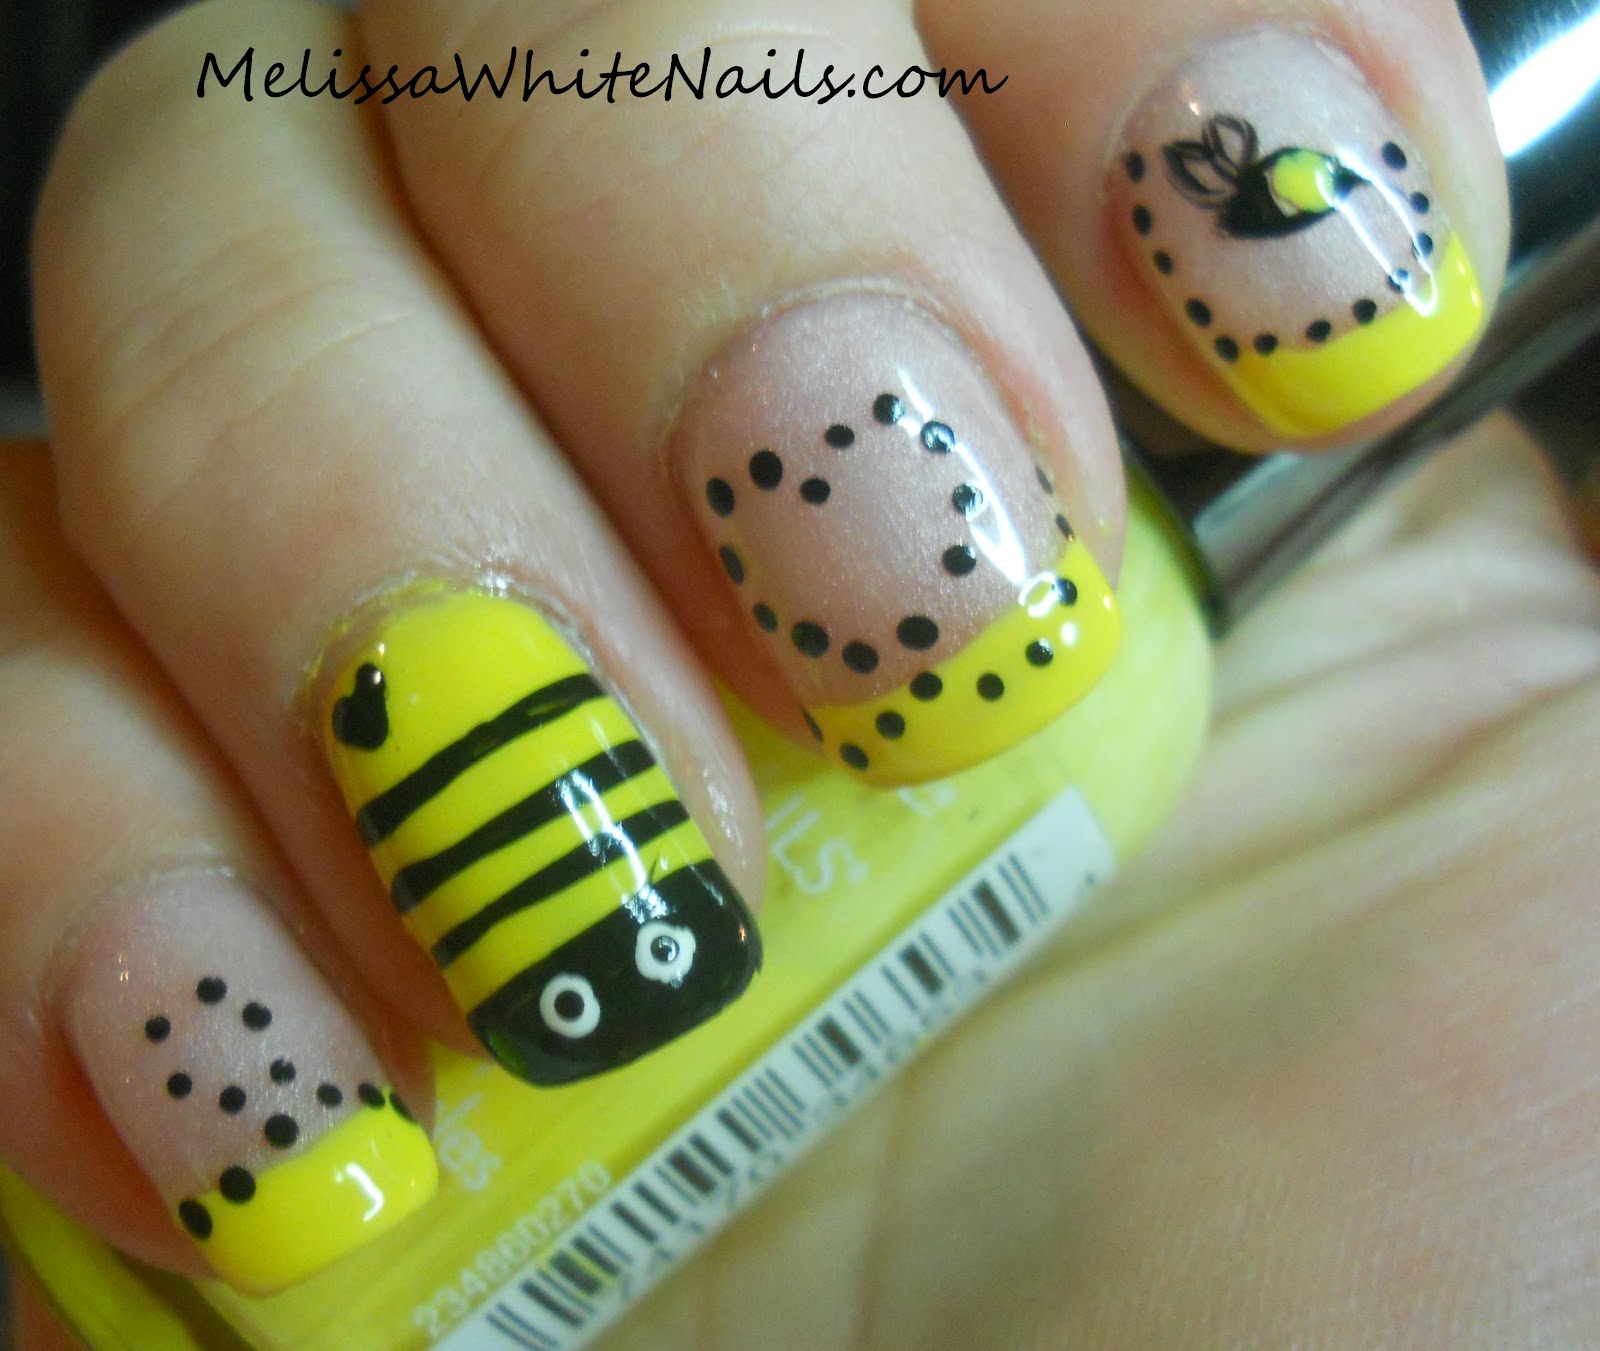 Adventures of a Nail Tech: Busy Bees